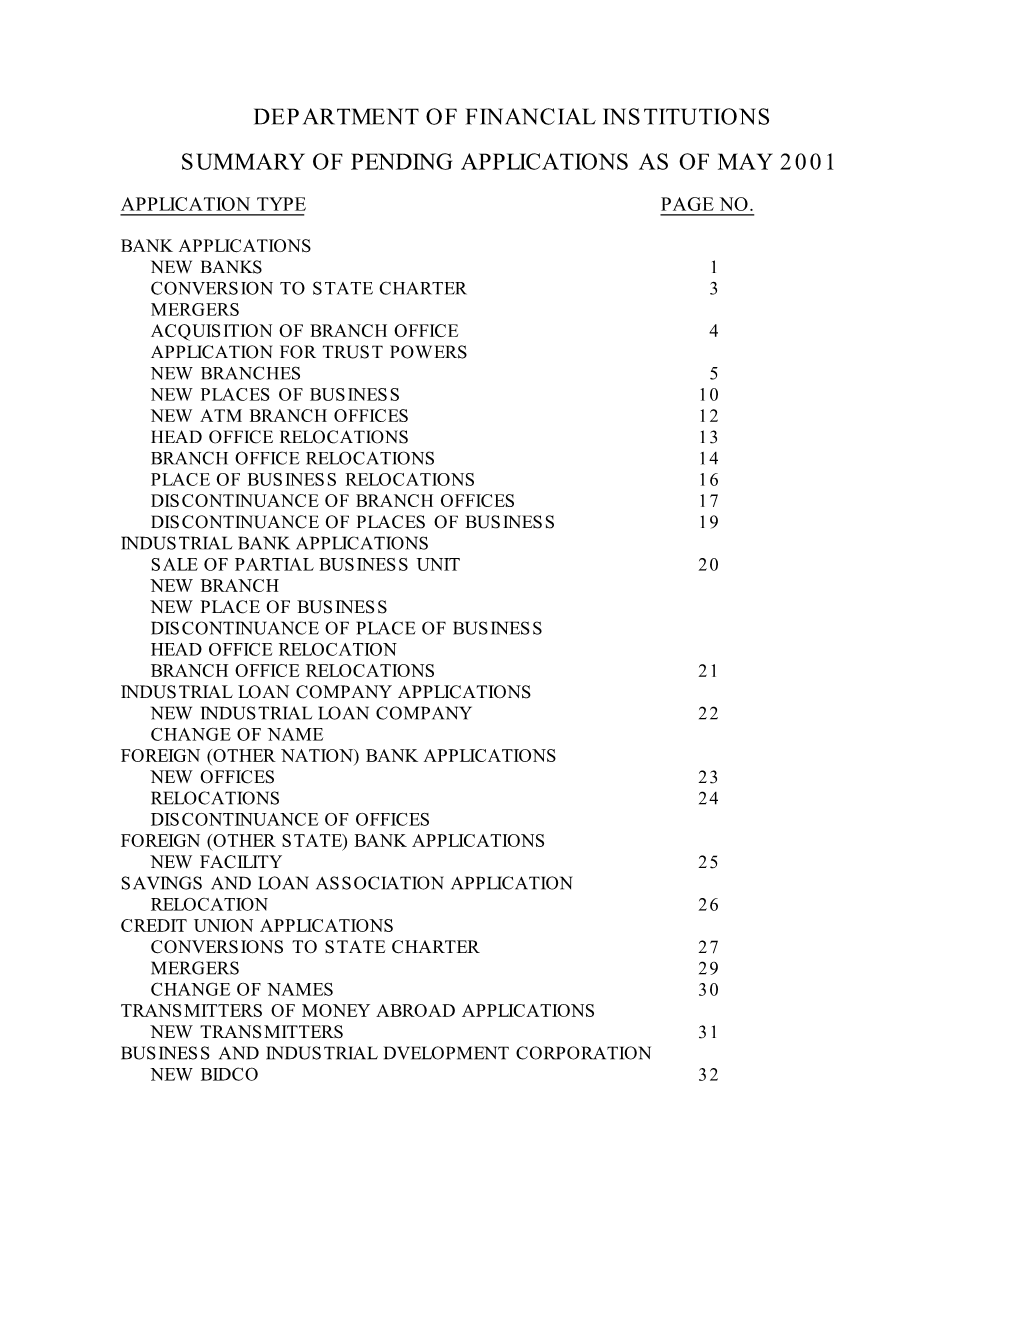 Department of Financial Institutions Summary of Pending Applications As of May 2001